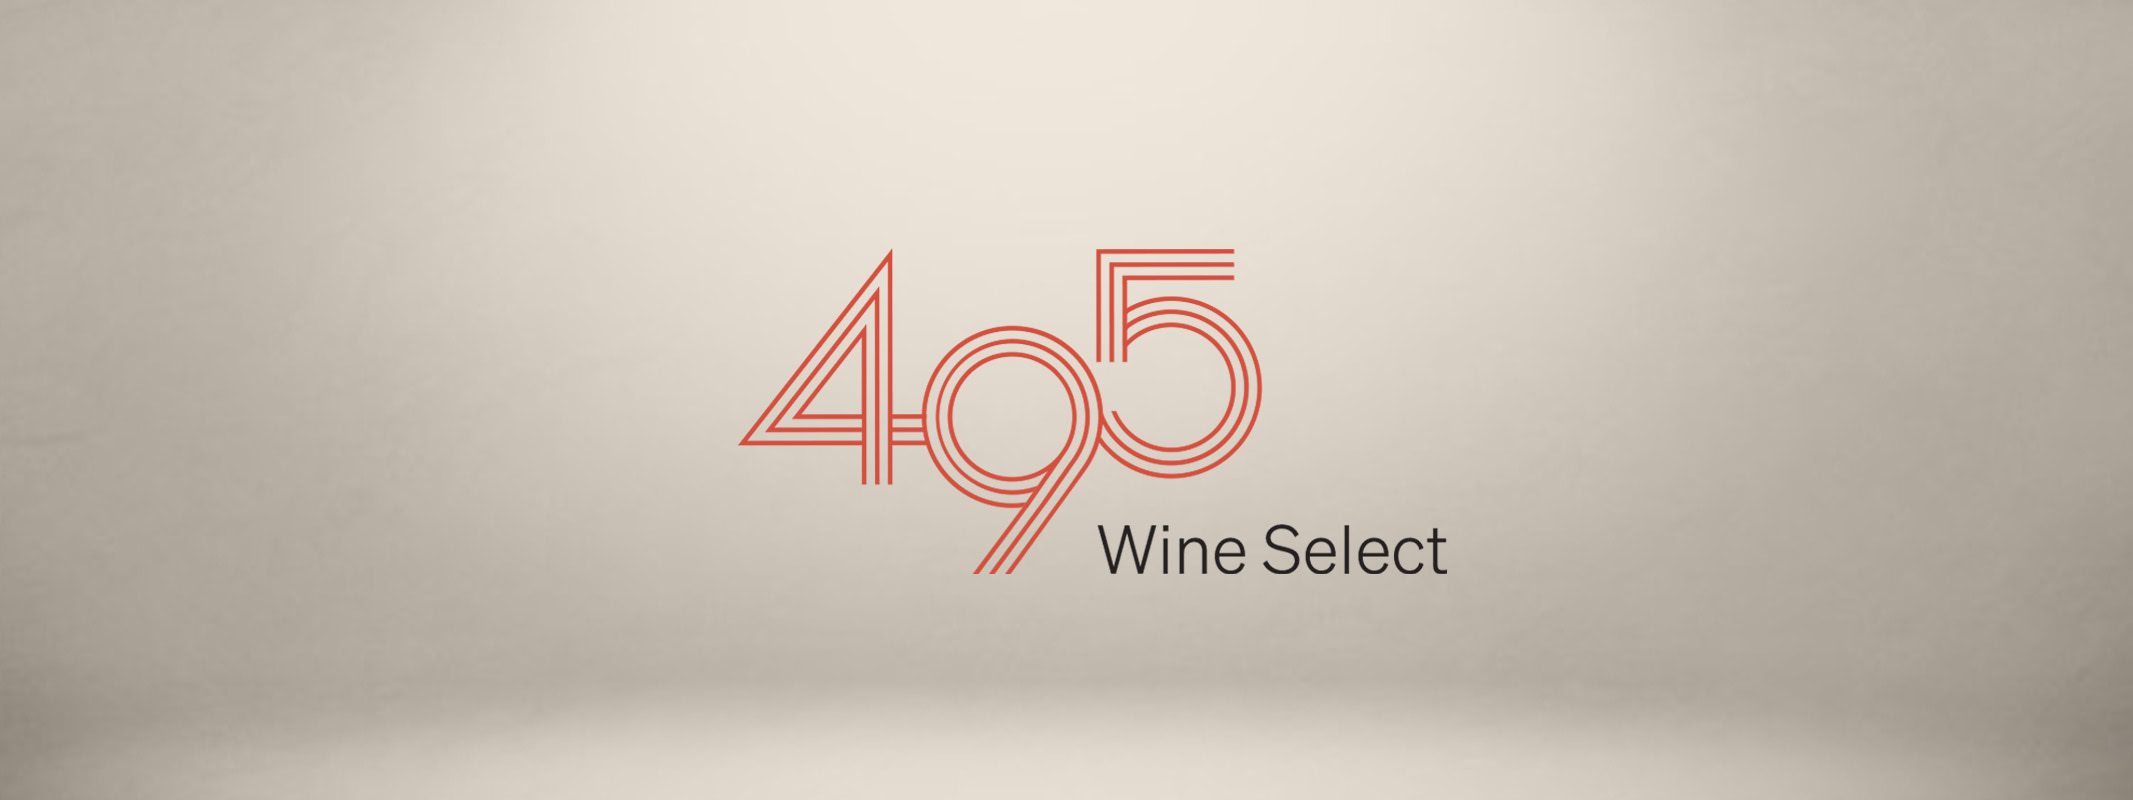 495 Wine Select logo overtop of a styled background